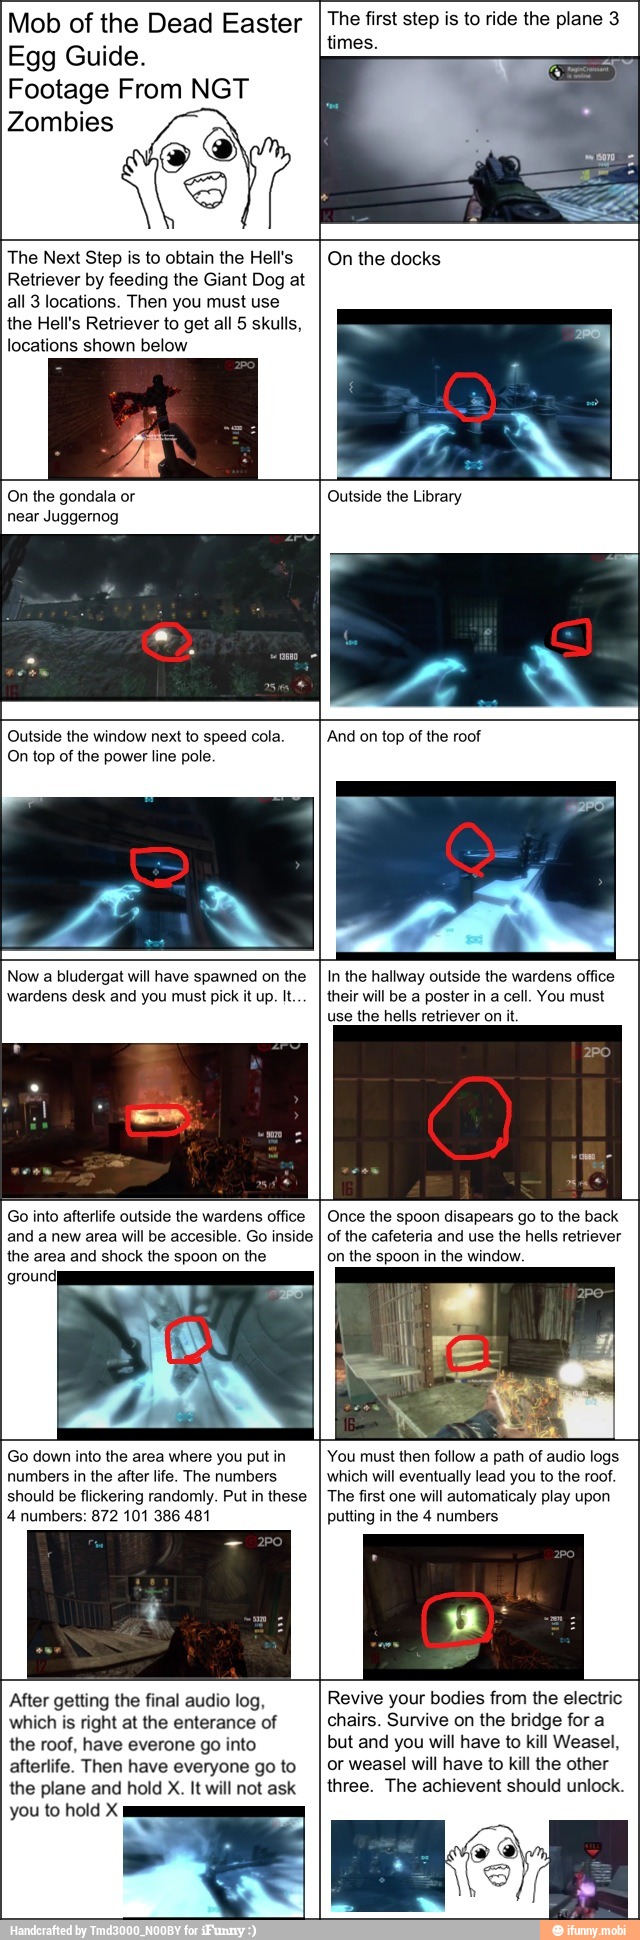 Mob Of The Dead Easter Egg Guide Footage From Ngt Zombies The Next Step Is To Obtain The Hell S Retriever By Feeding The Giant Dog At All 3 Locations Then You Must